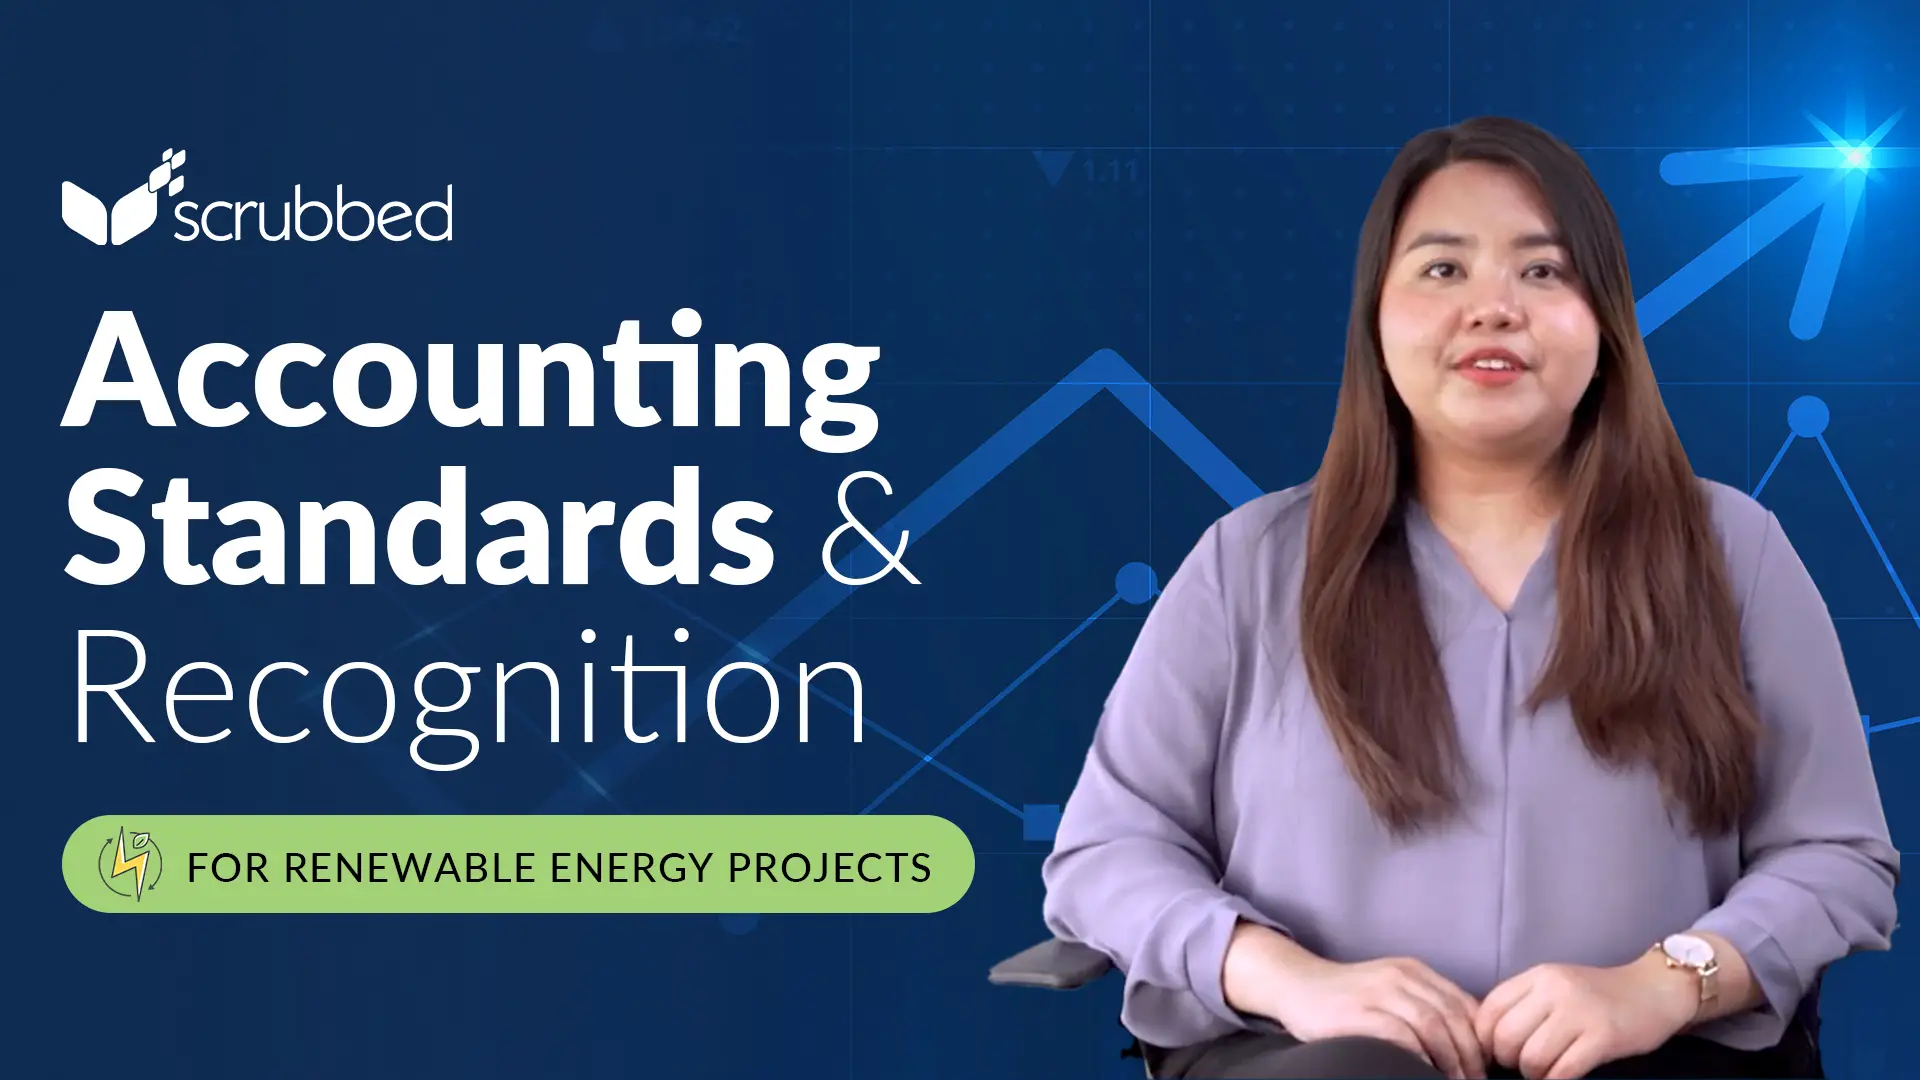 What accounting standards and regulations are applicable to renewable energy companies?